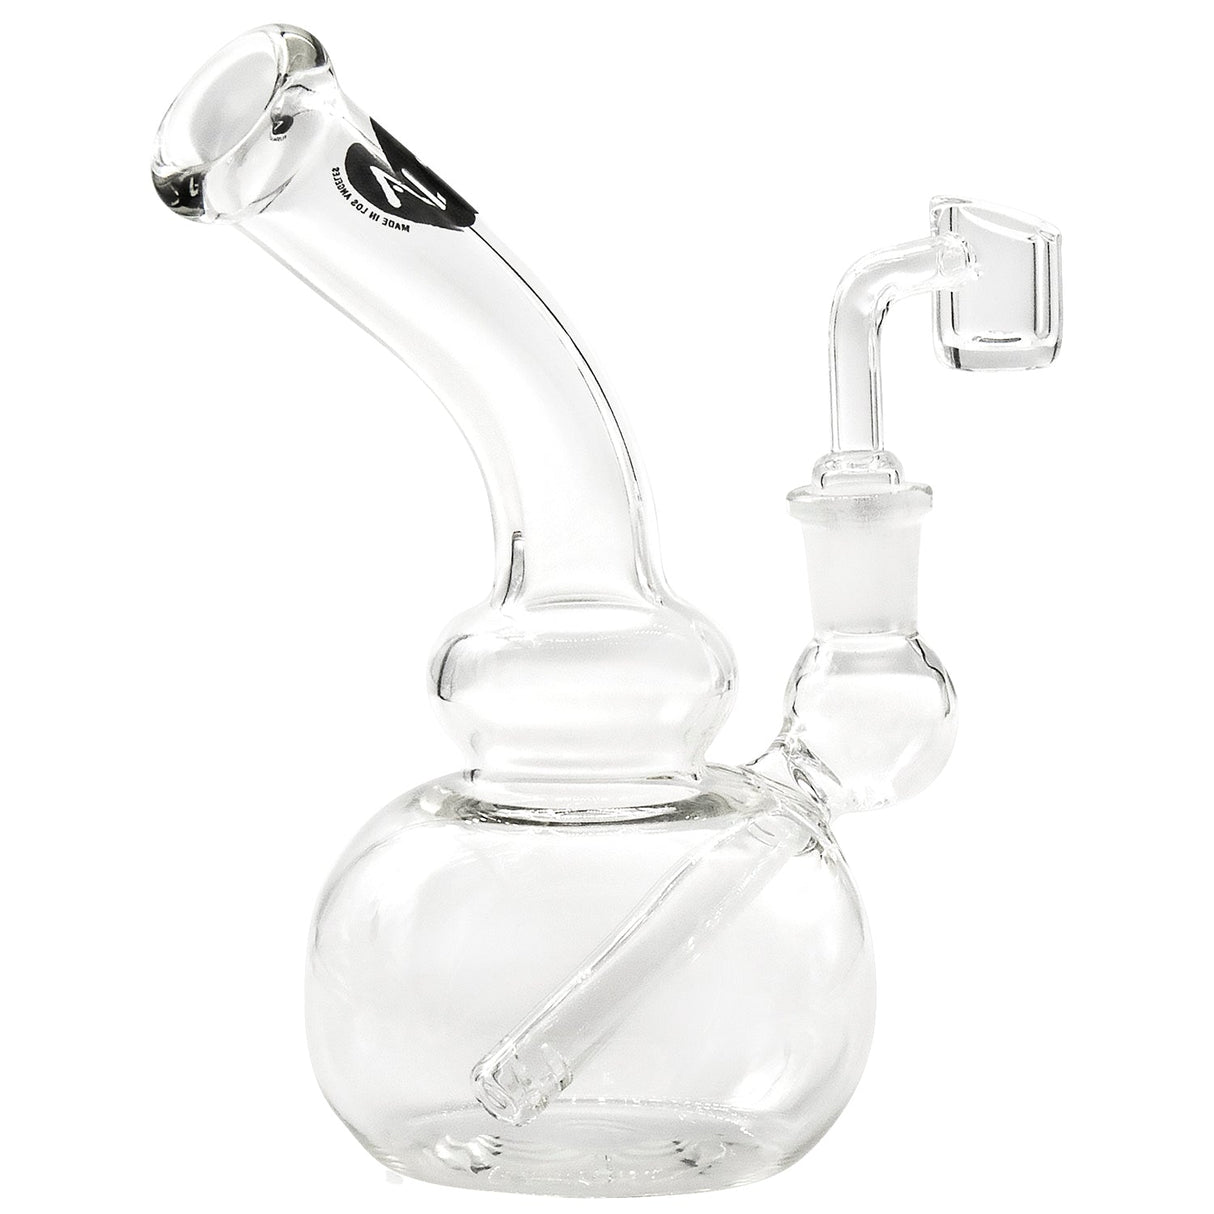 LA Pipes Bubble Concentrate Waterpipe side view, 6" Borosilicate glass with Quartz banger for concentrates